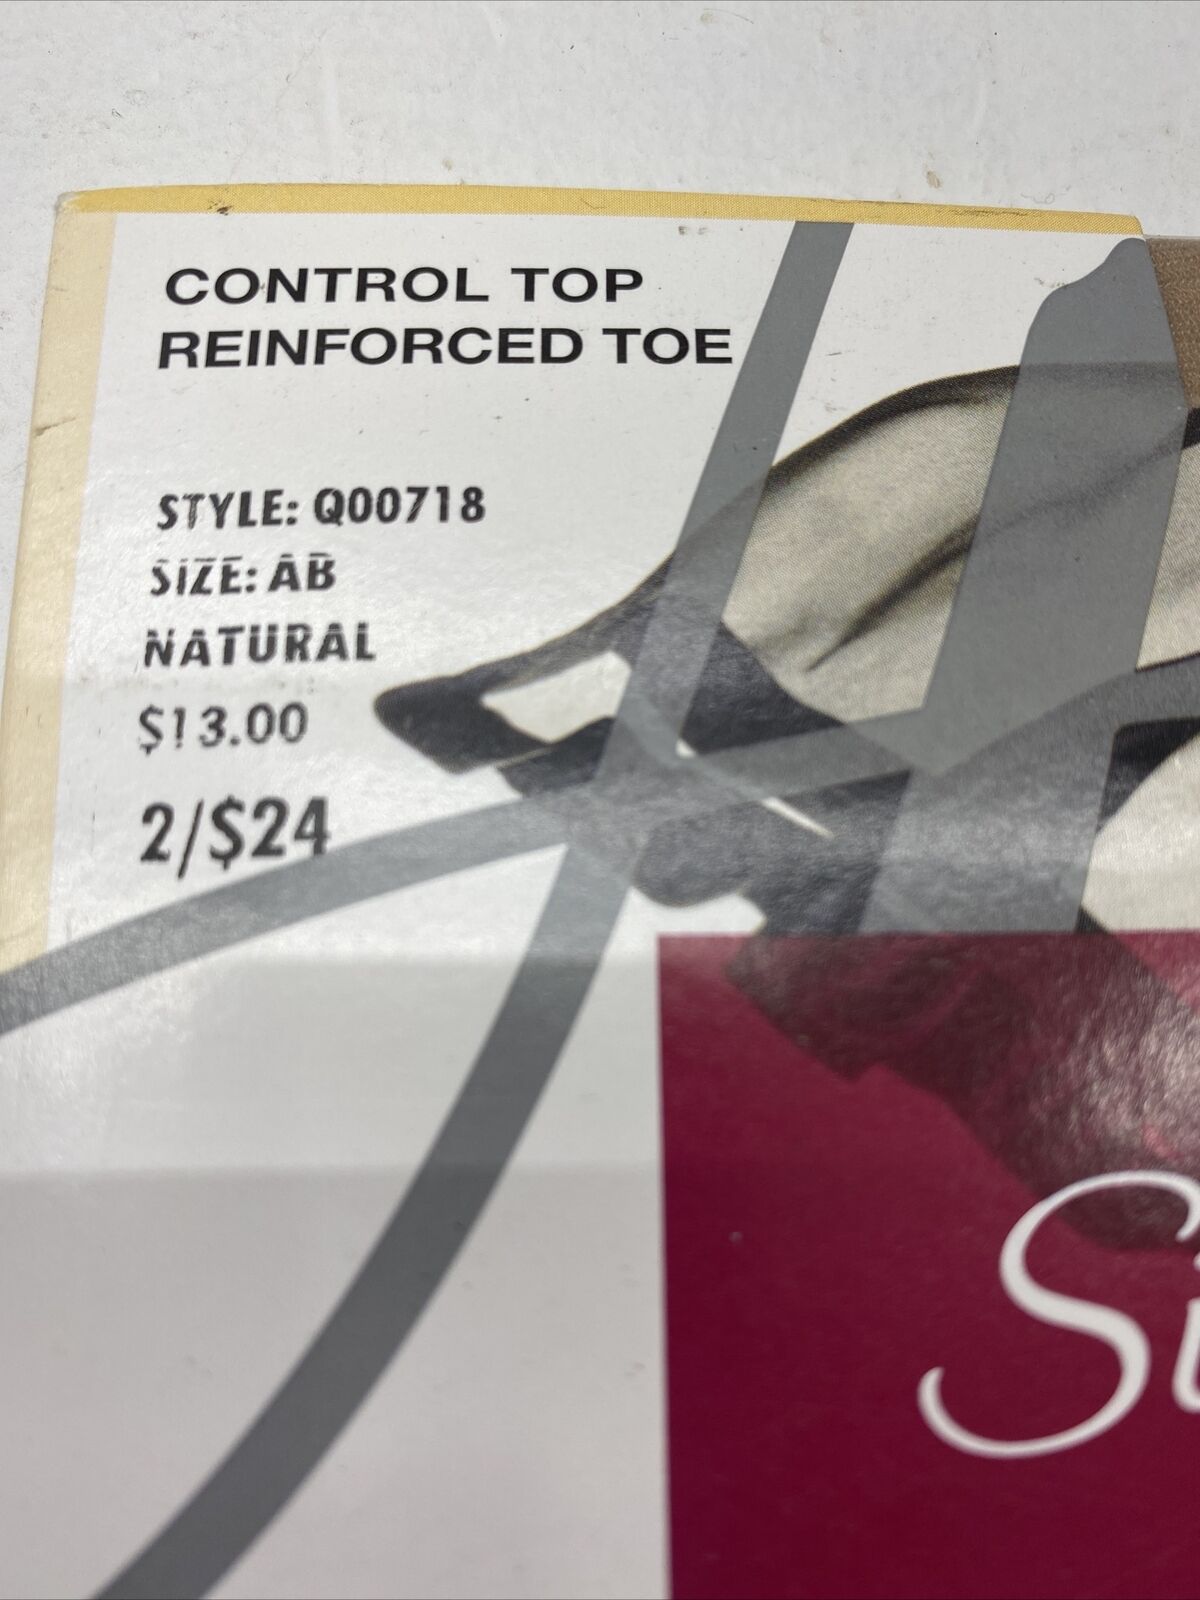 Silk Reflections Control Top Reinforced Toe Pantyhose Q00718 Size